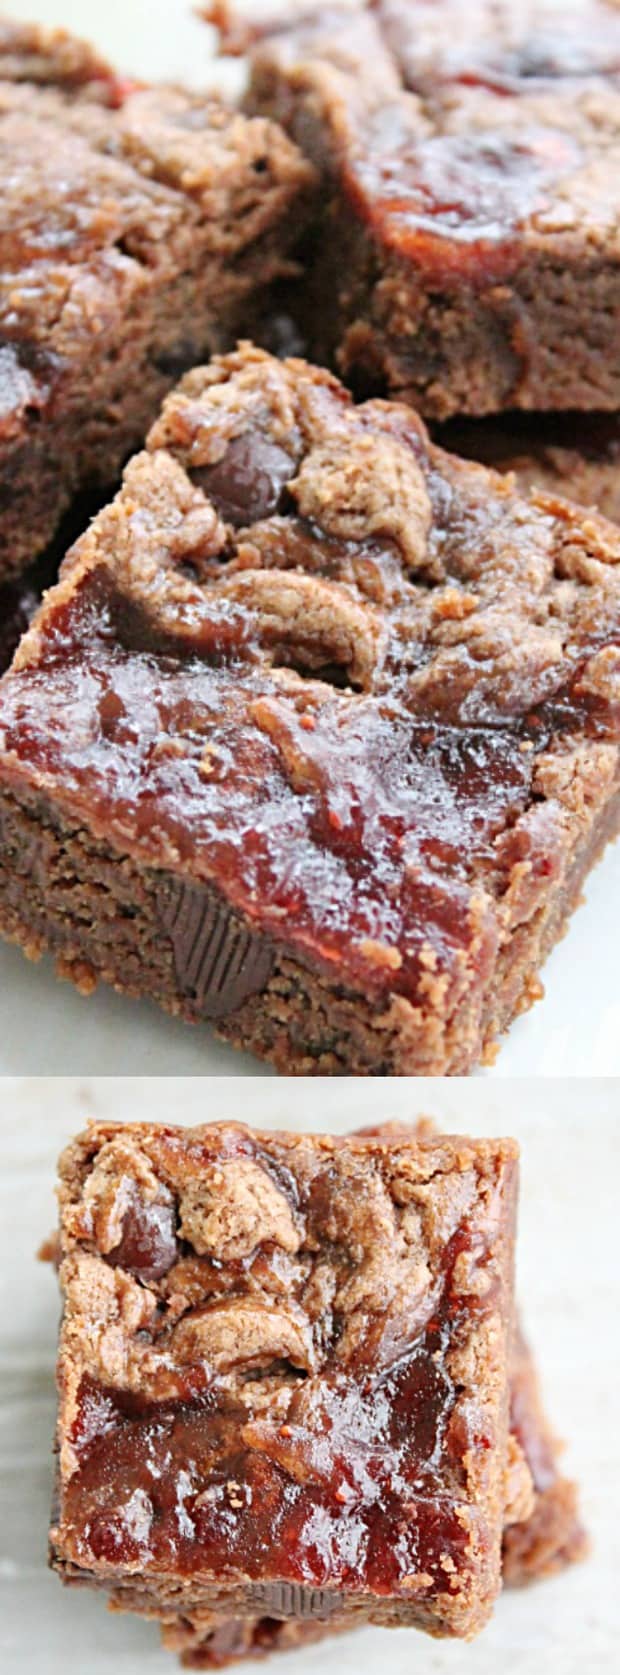 Peanut Butter And Jelly Brownies - The Best Blog Recipes